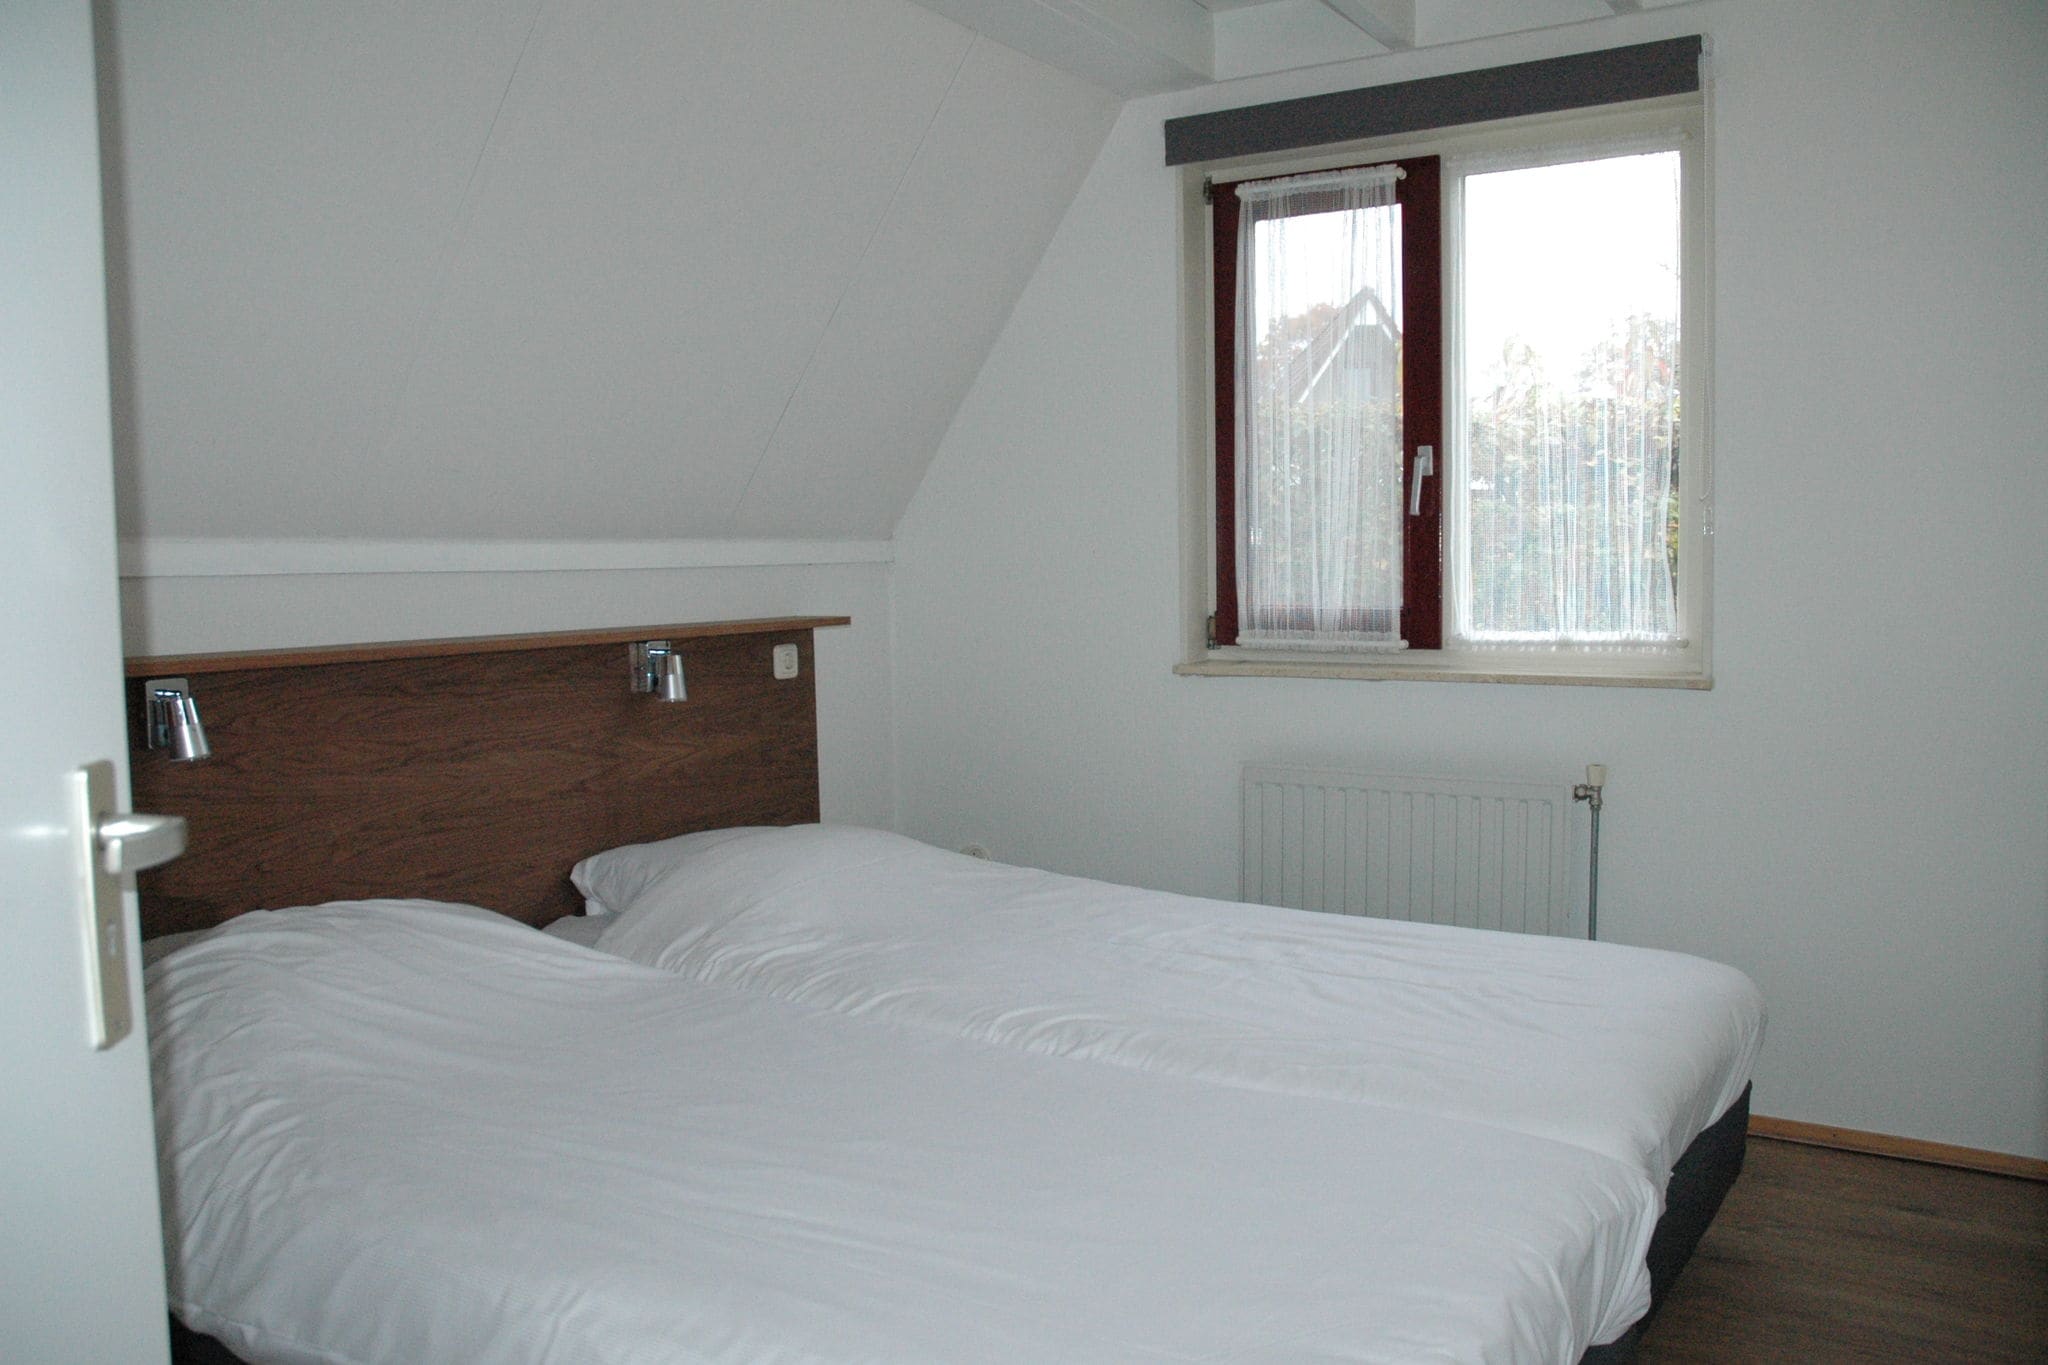 Detached holiday home with dishwasher, 16 km. from Assen